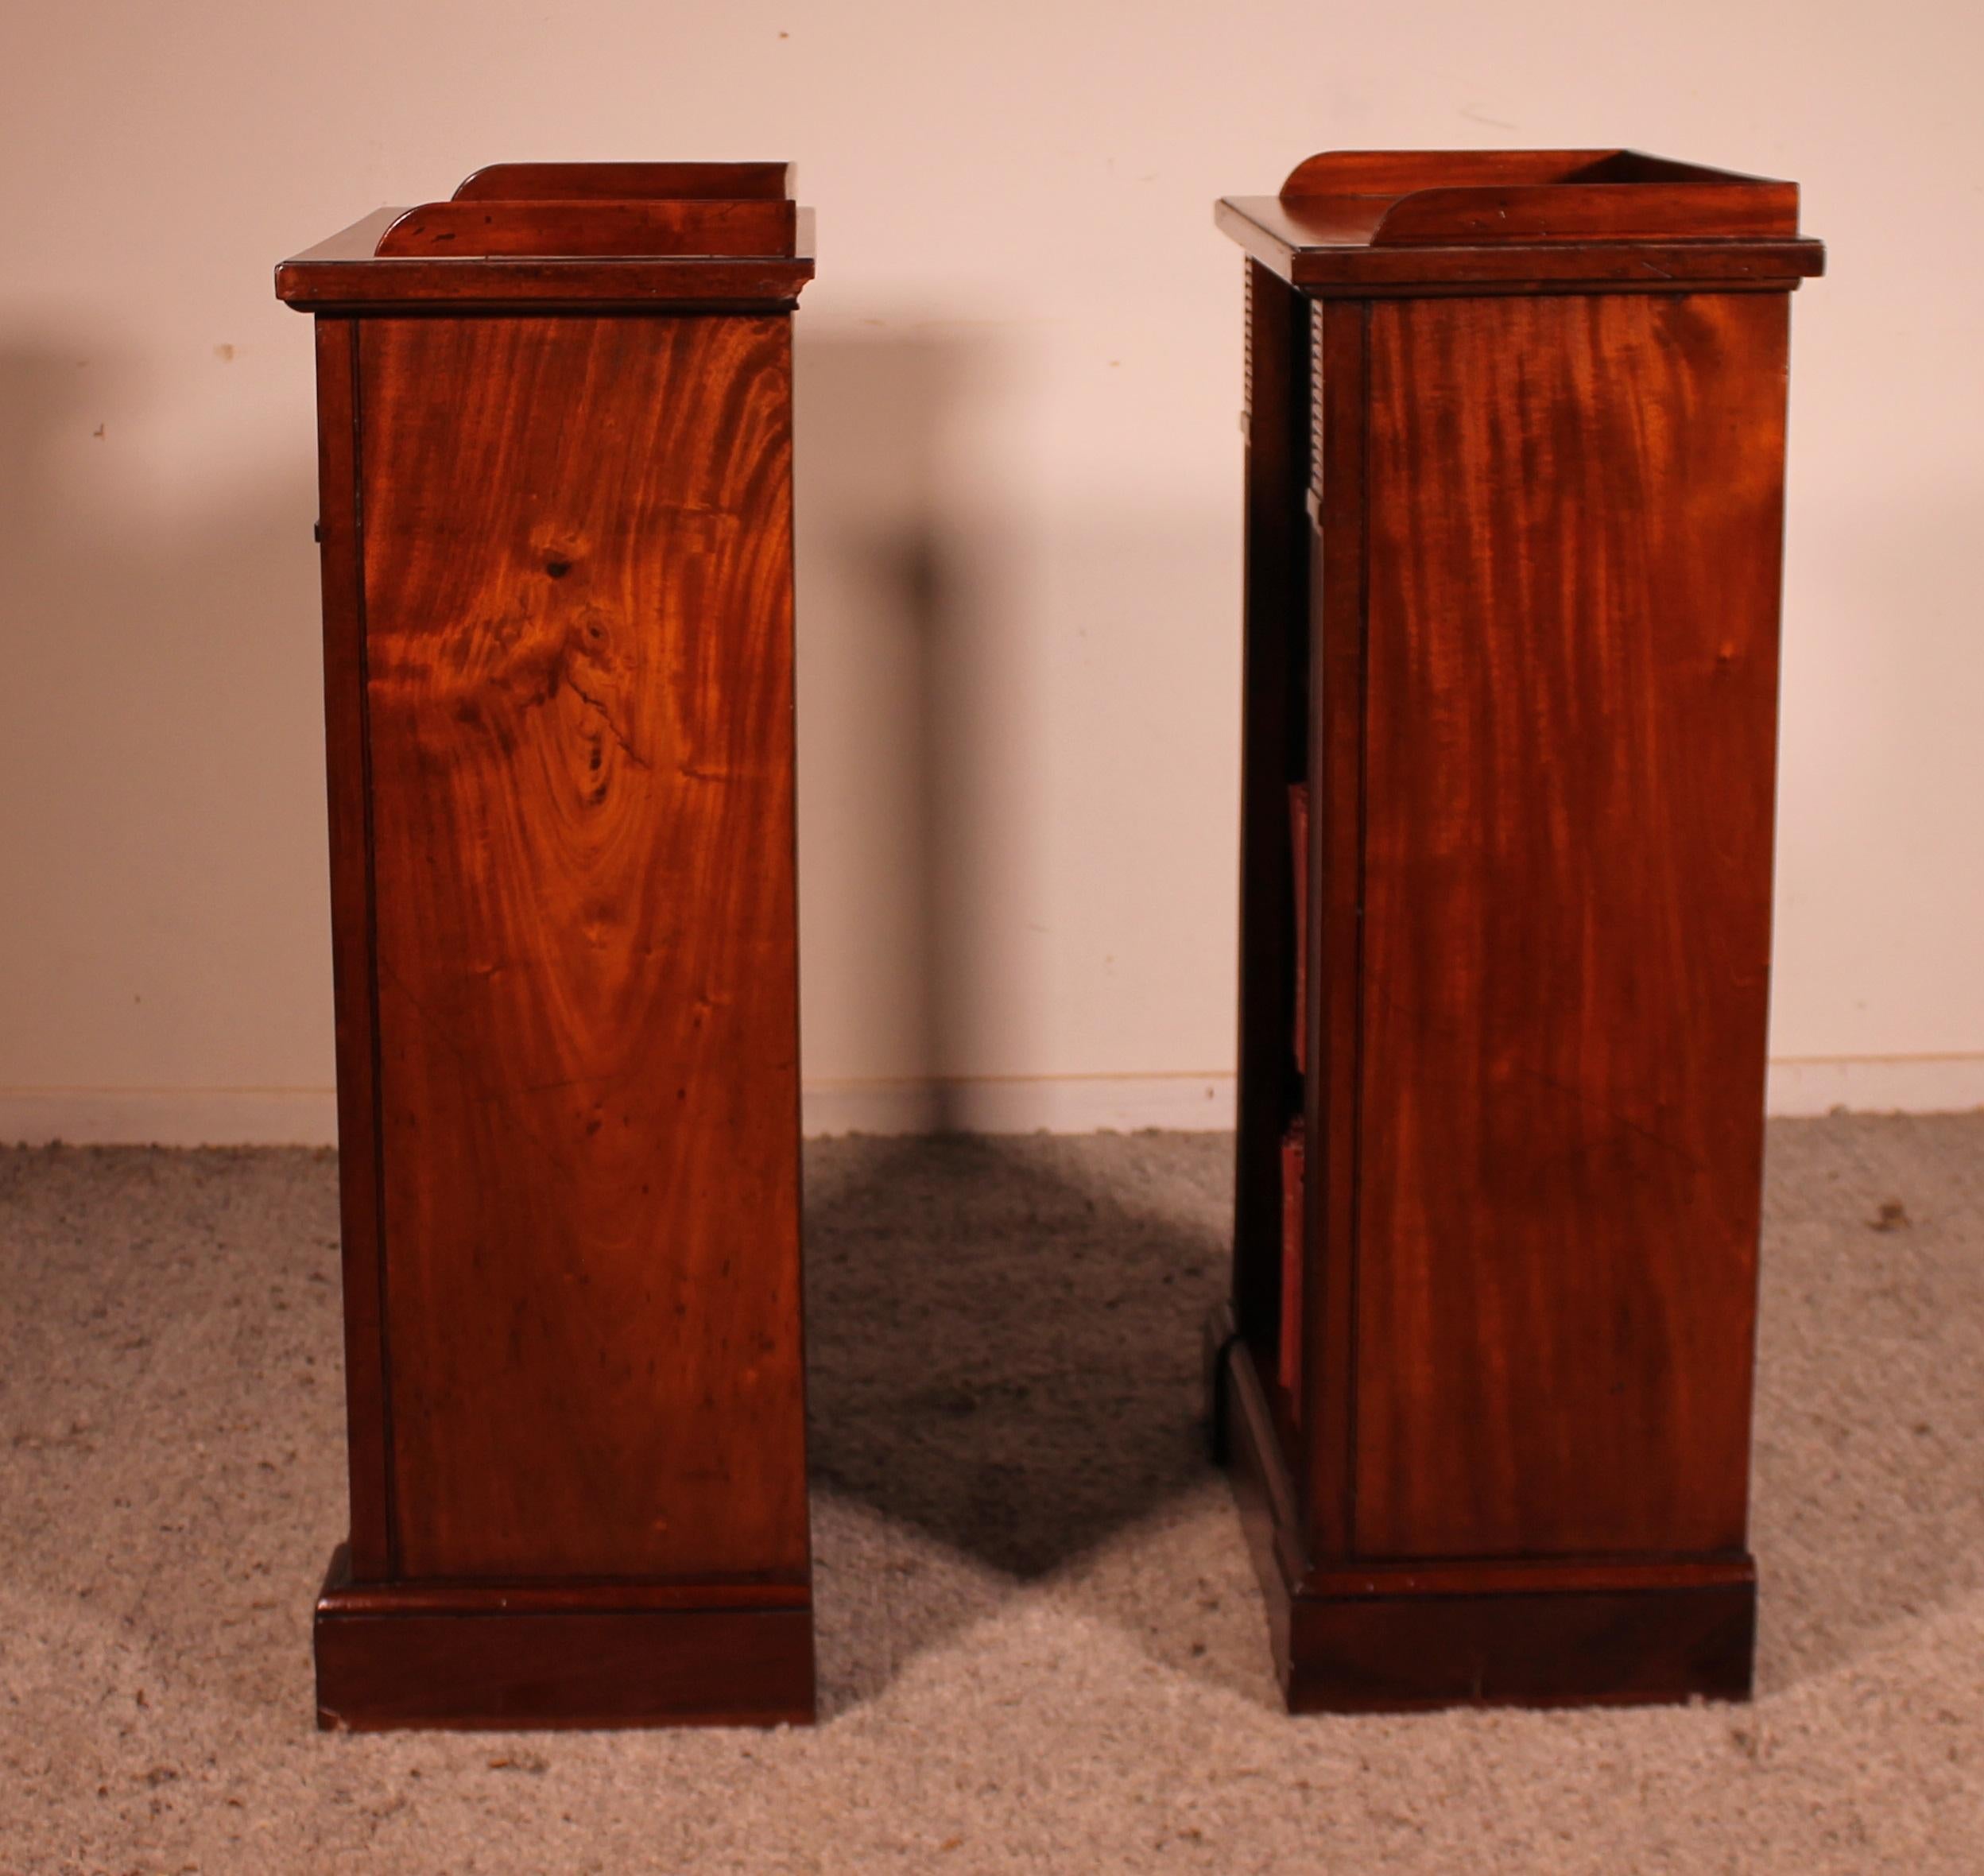 Pair of Open Bookcases from the Beginning of the 19th Century, William IV 1